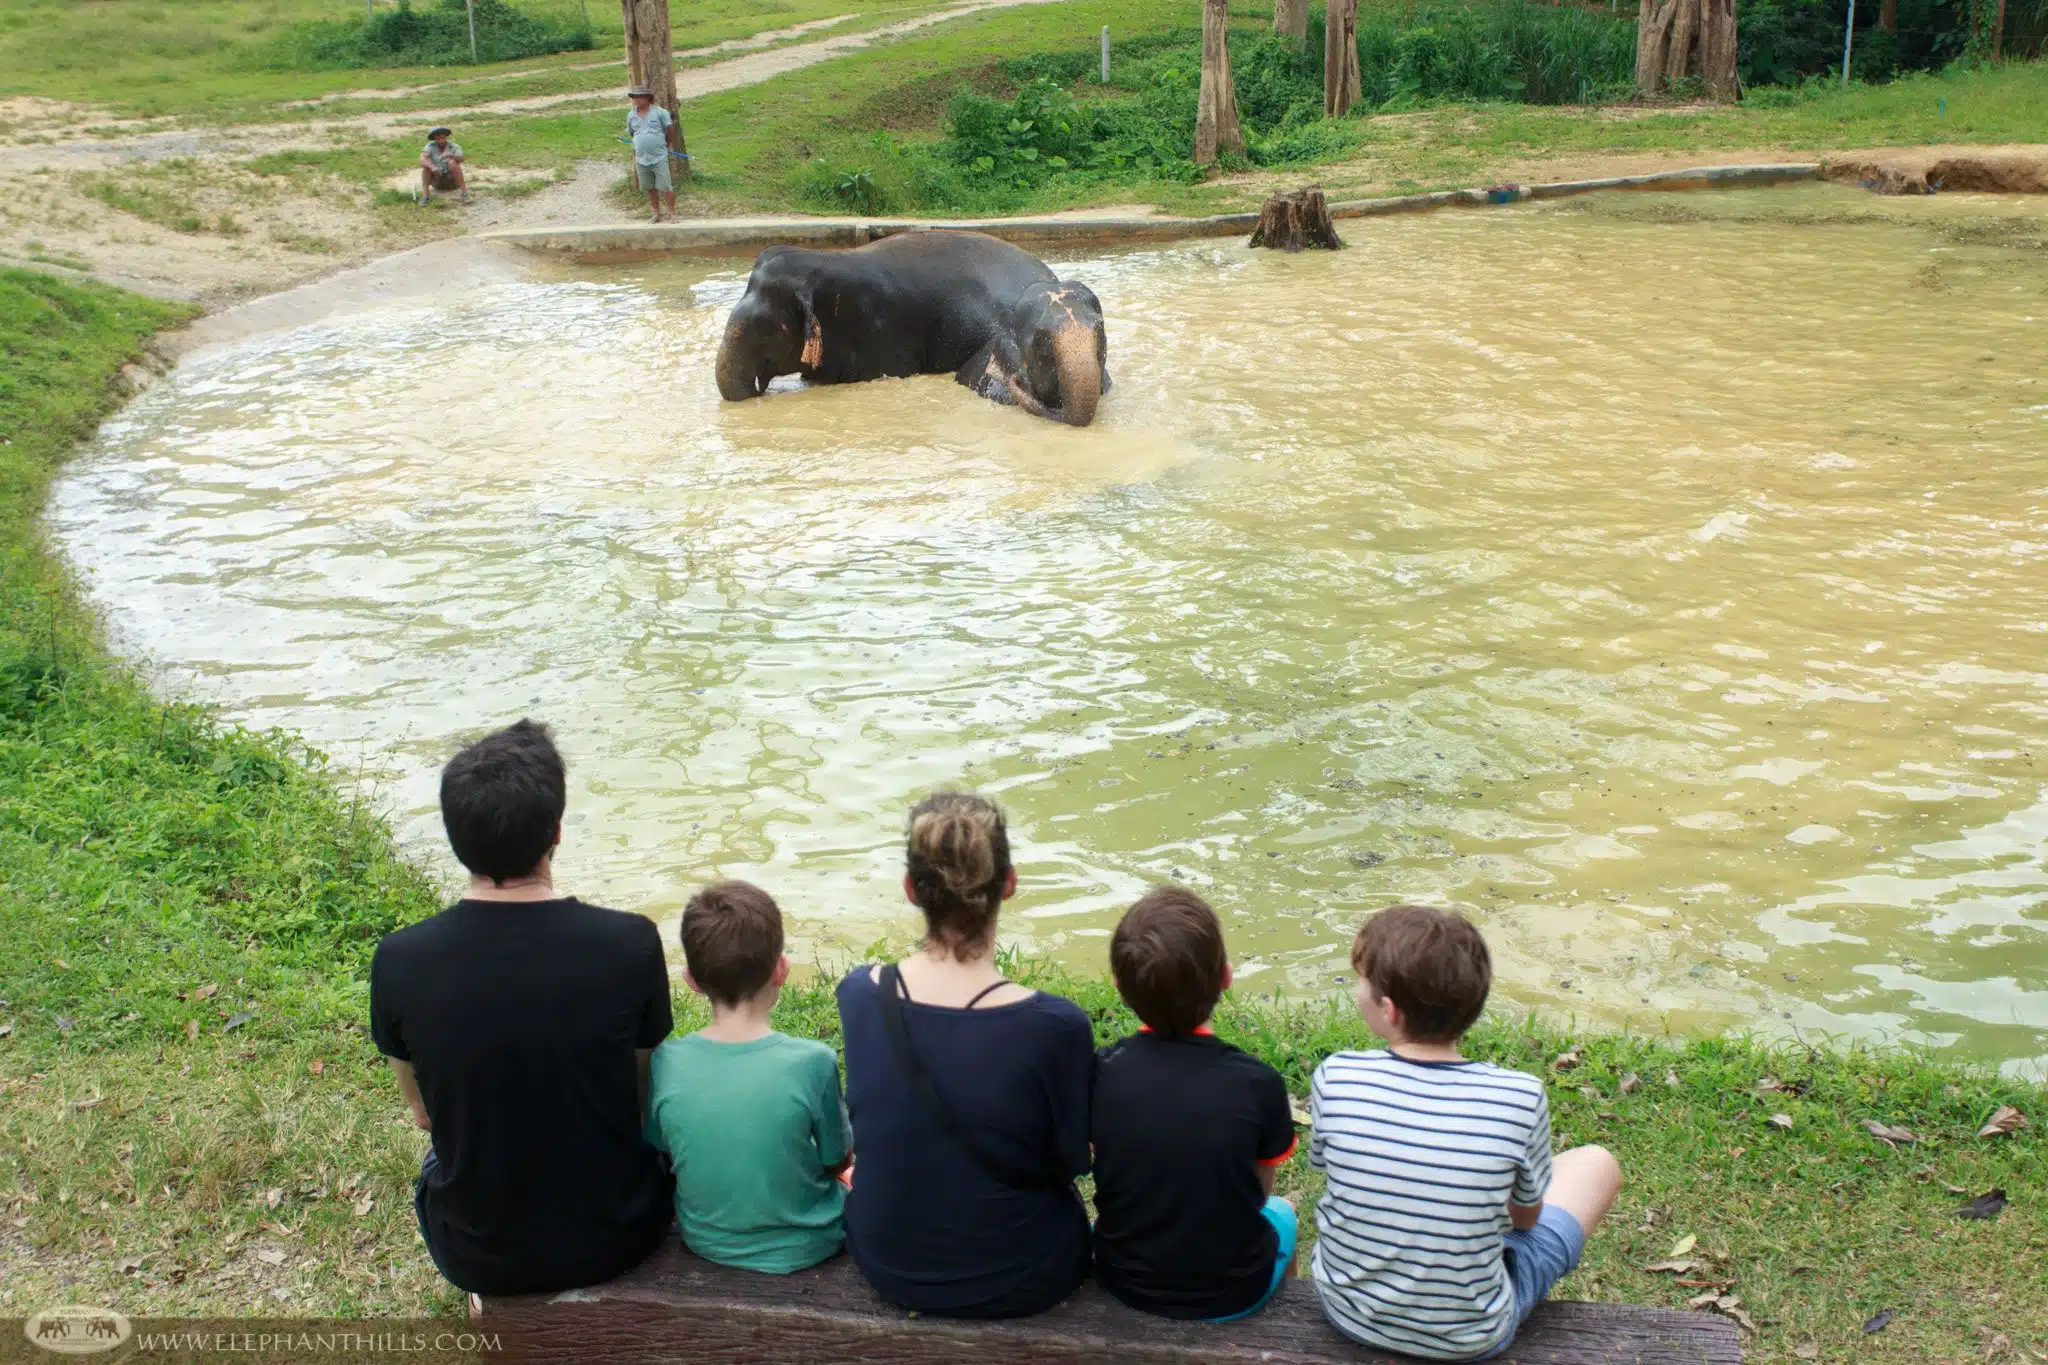 The family are watching an elephant playing in their swimming pool